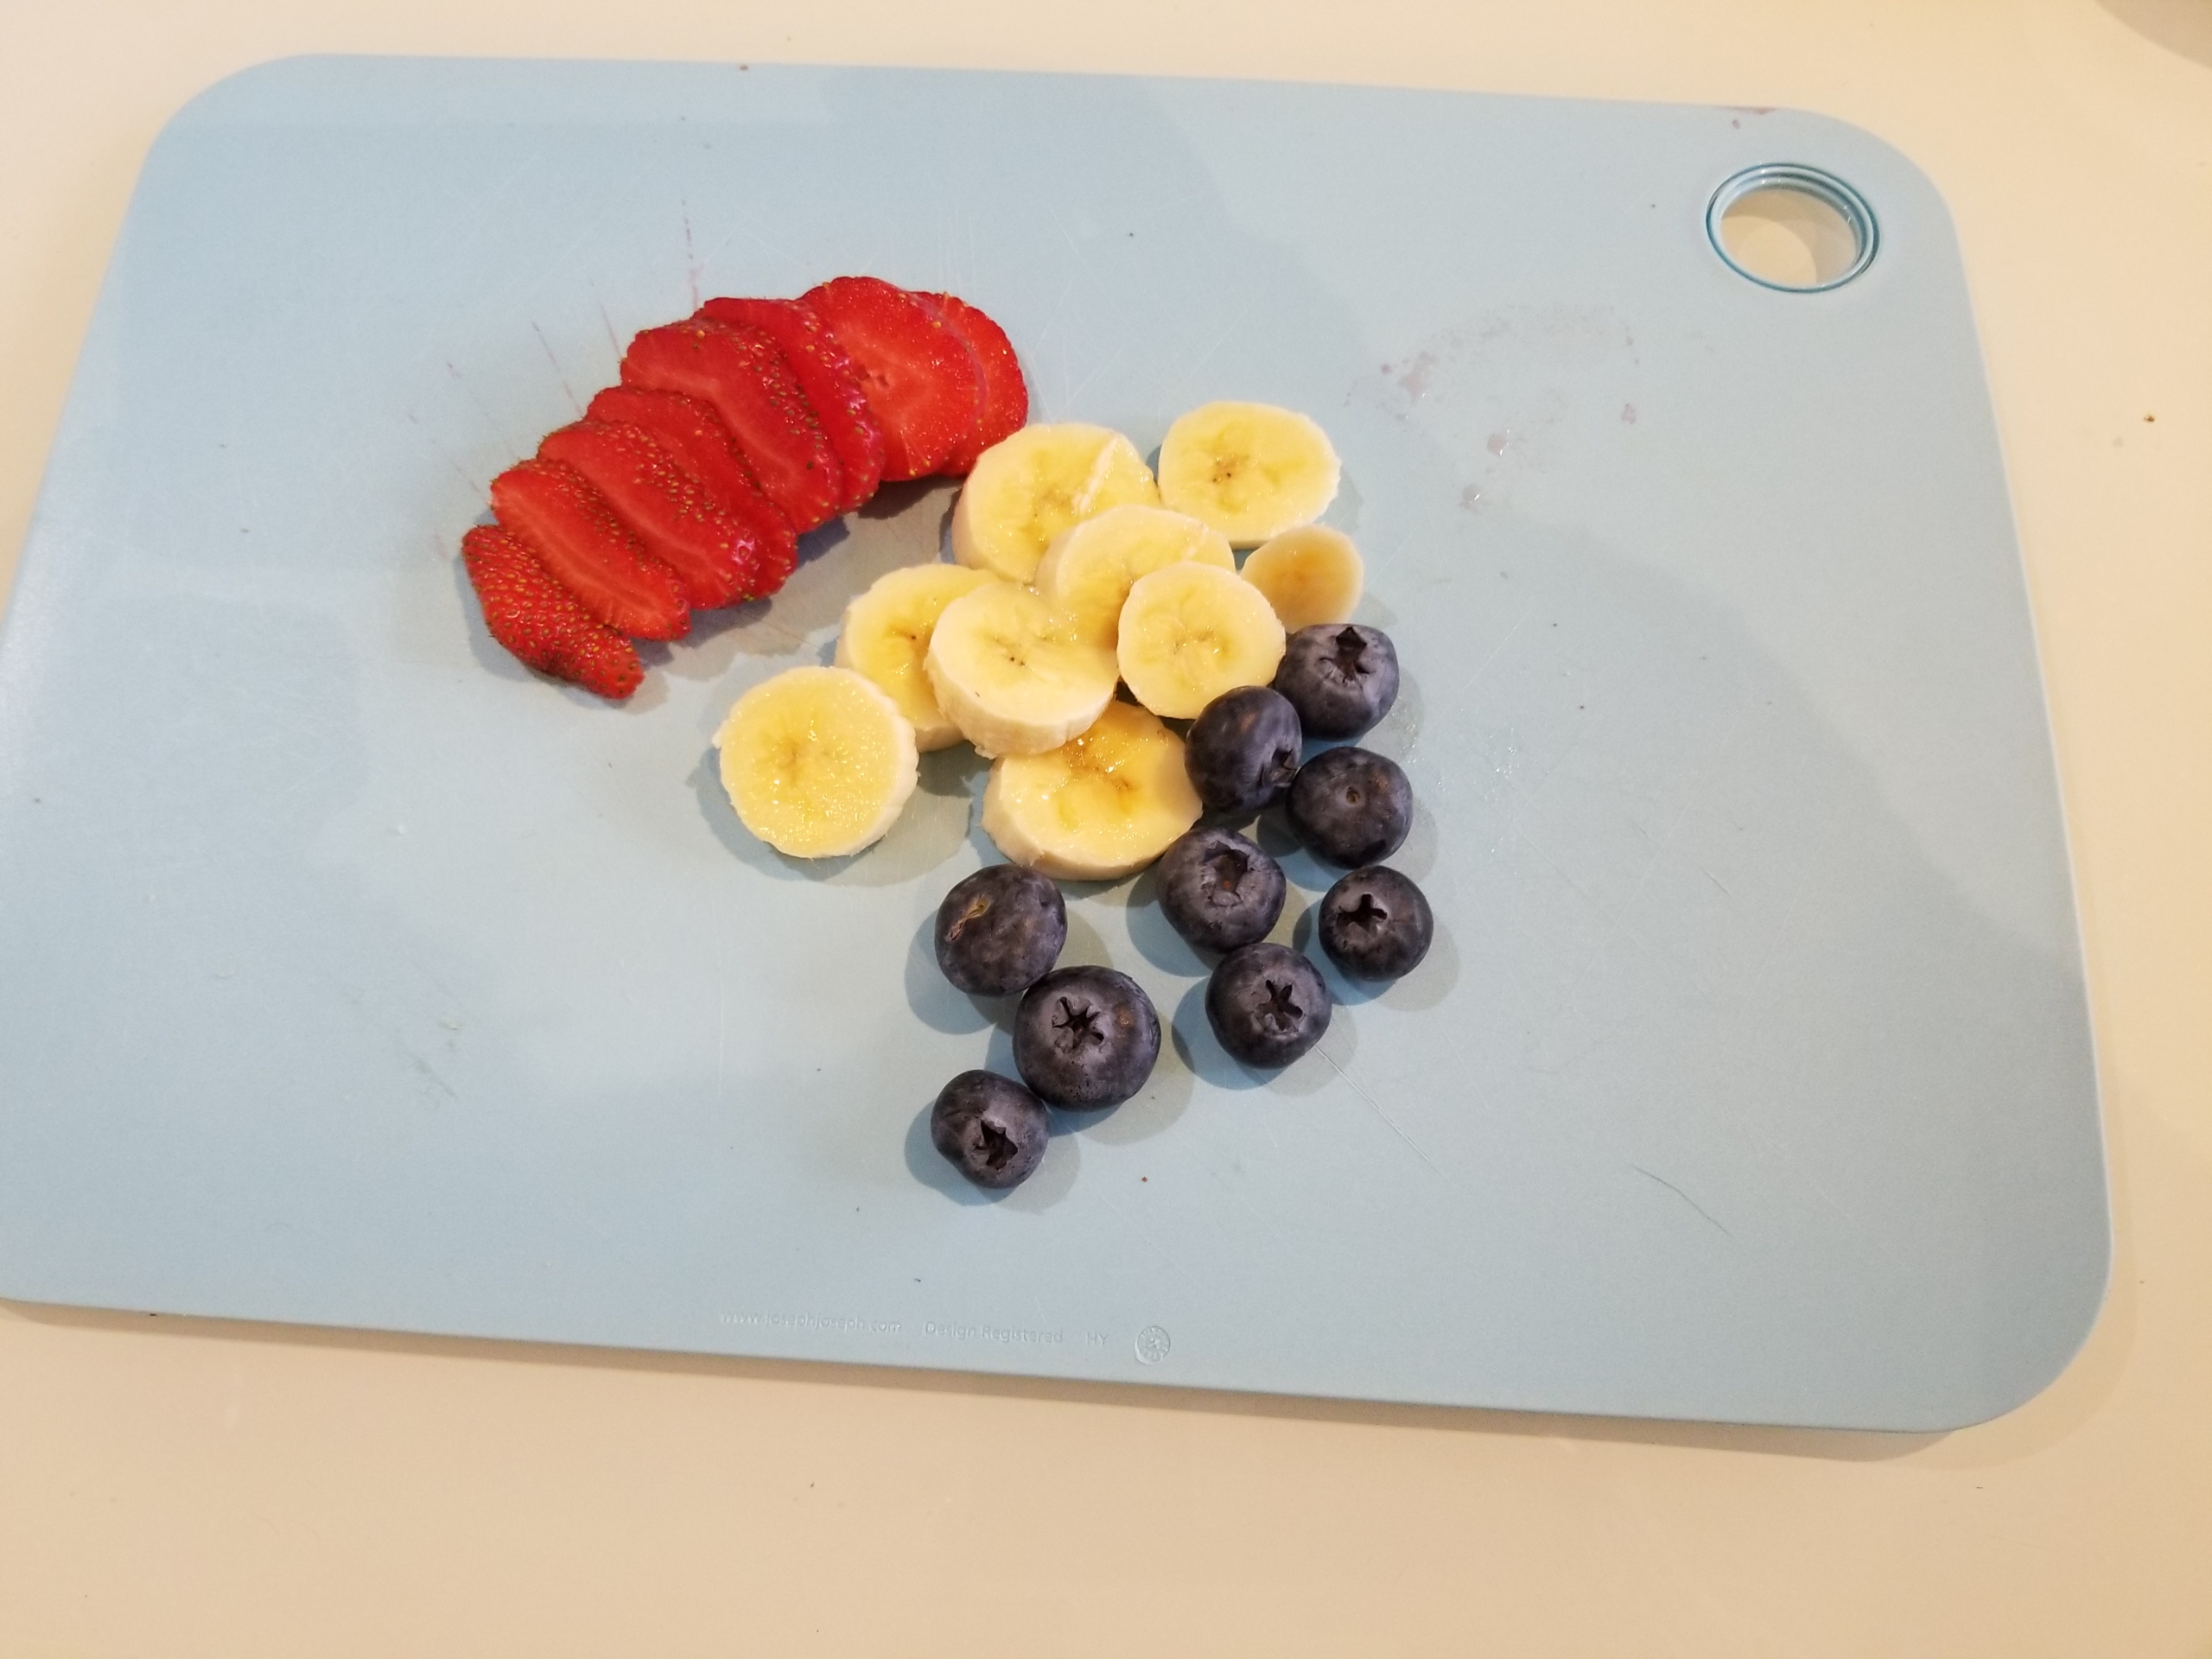 Easy Easter recipe step three - pieces of cut berries and banana on cutting board